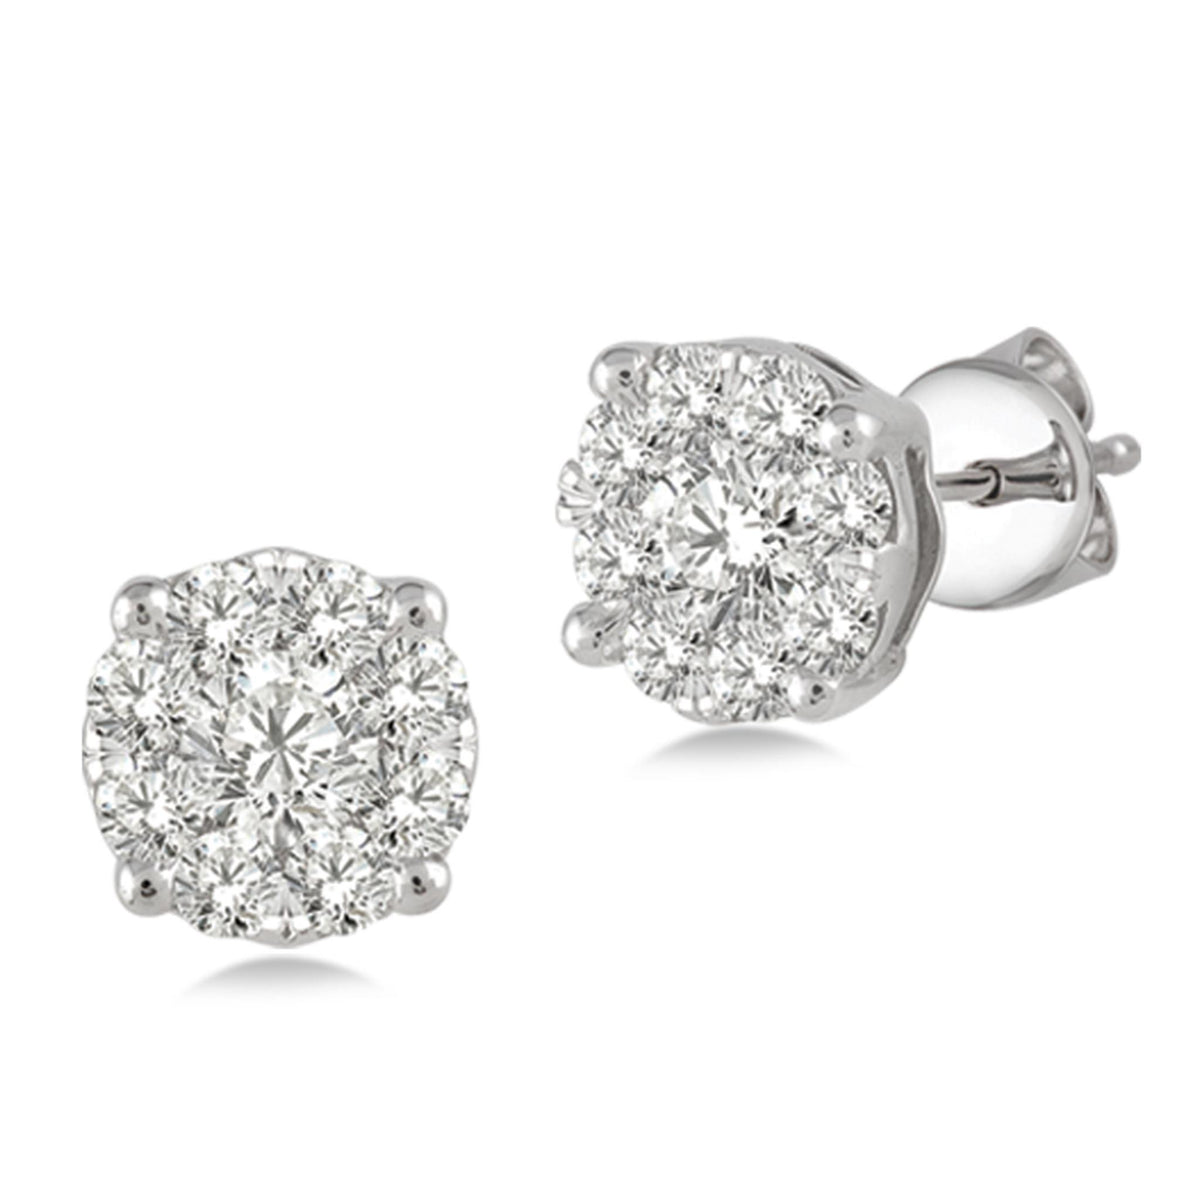 Lovebright 14Kt White Gold Stud Earrings With 1.00cttw Natural Diamonds